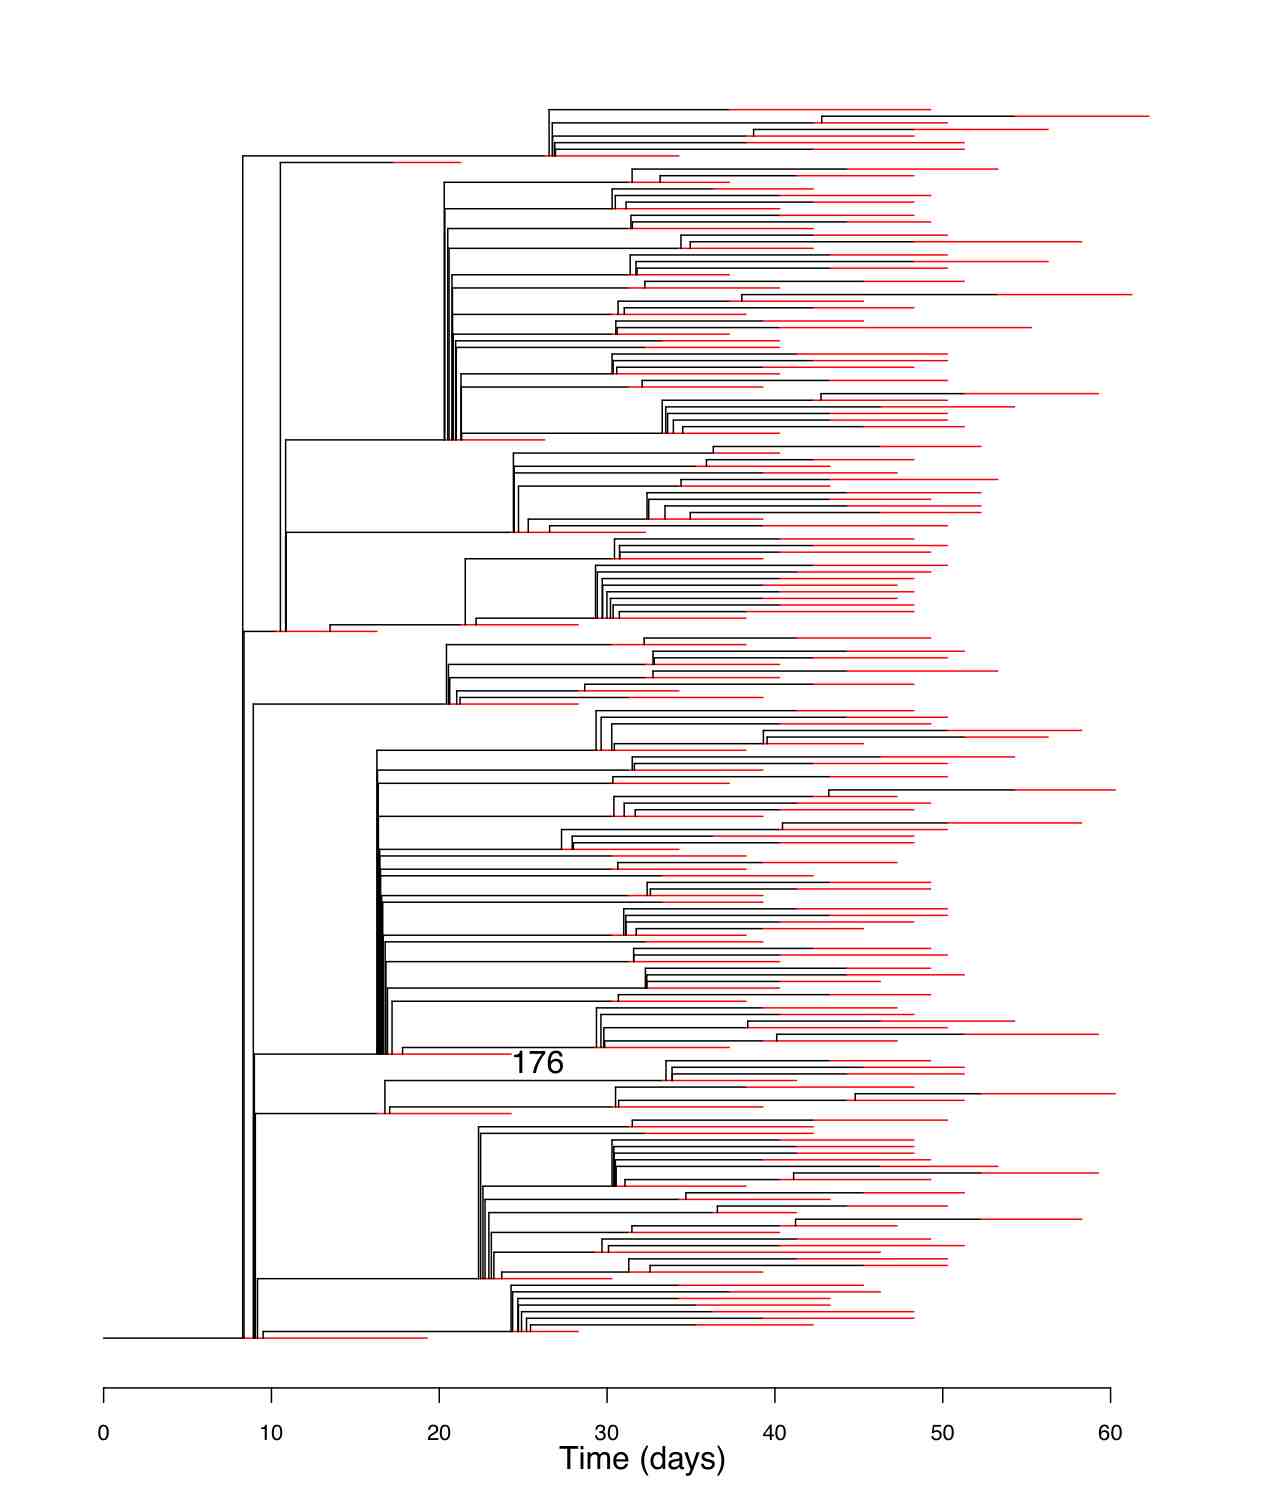 A Network-based Analysis of the 1861 Hagelloch Measles Data